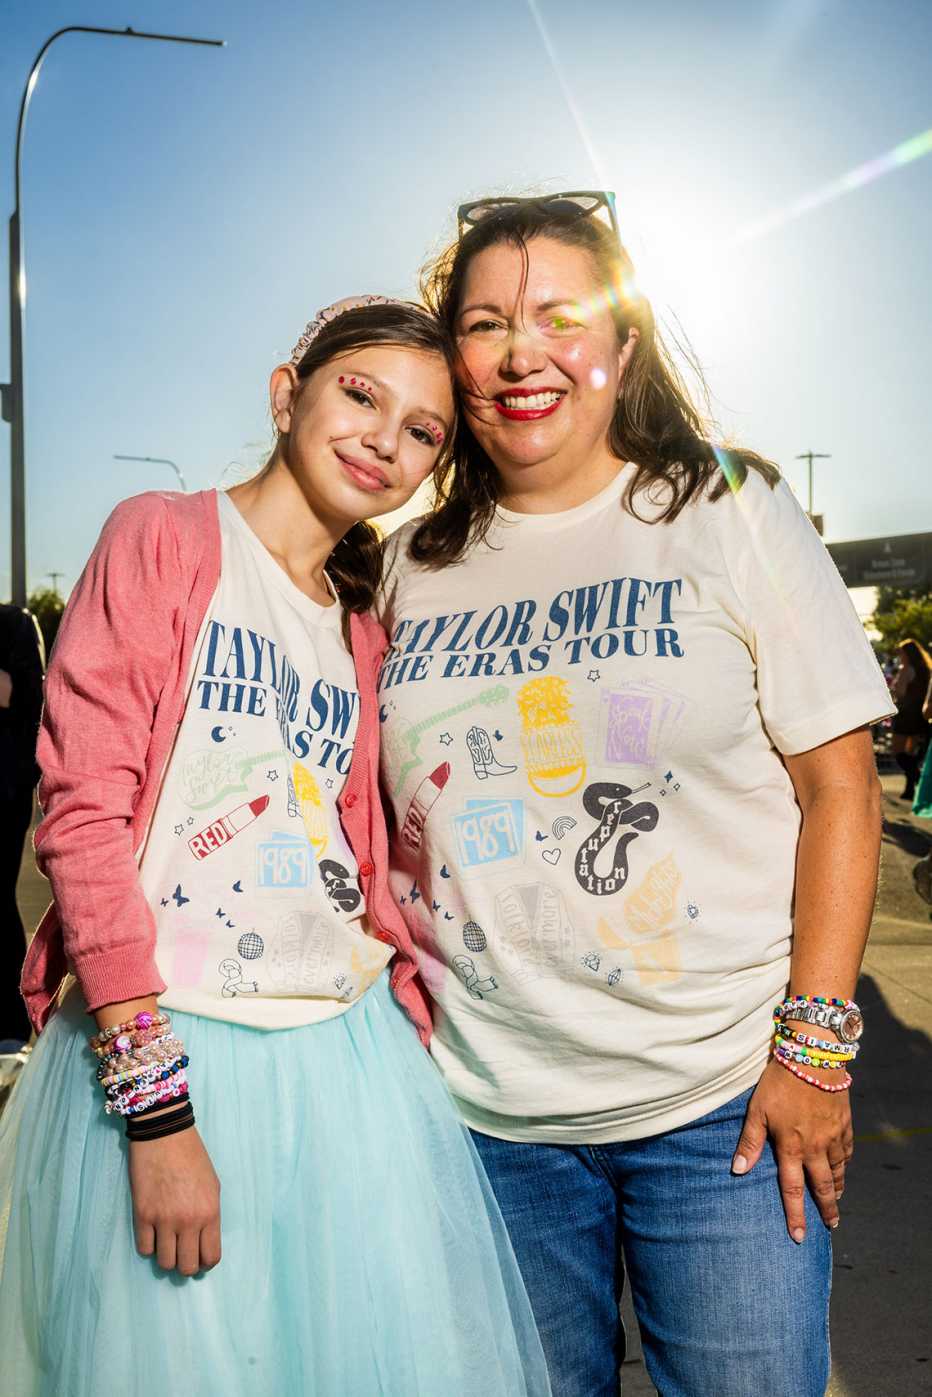 amber tellez and her daughter charlotte mitchell of monrovia california pose outside of sofi stadium in los angeles california 